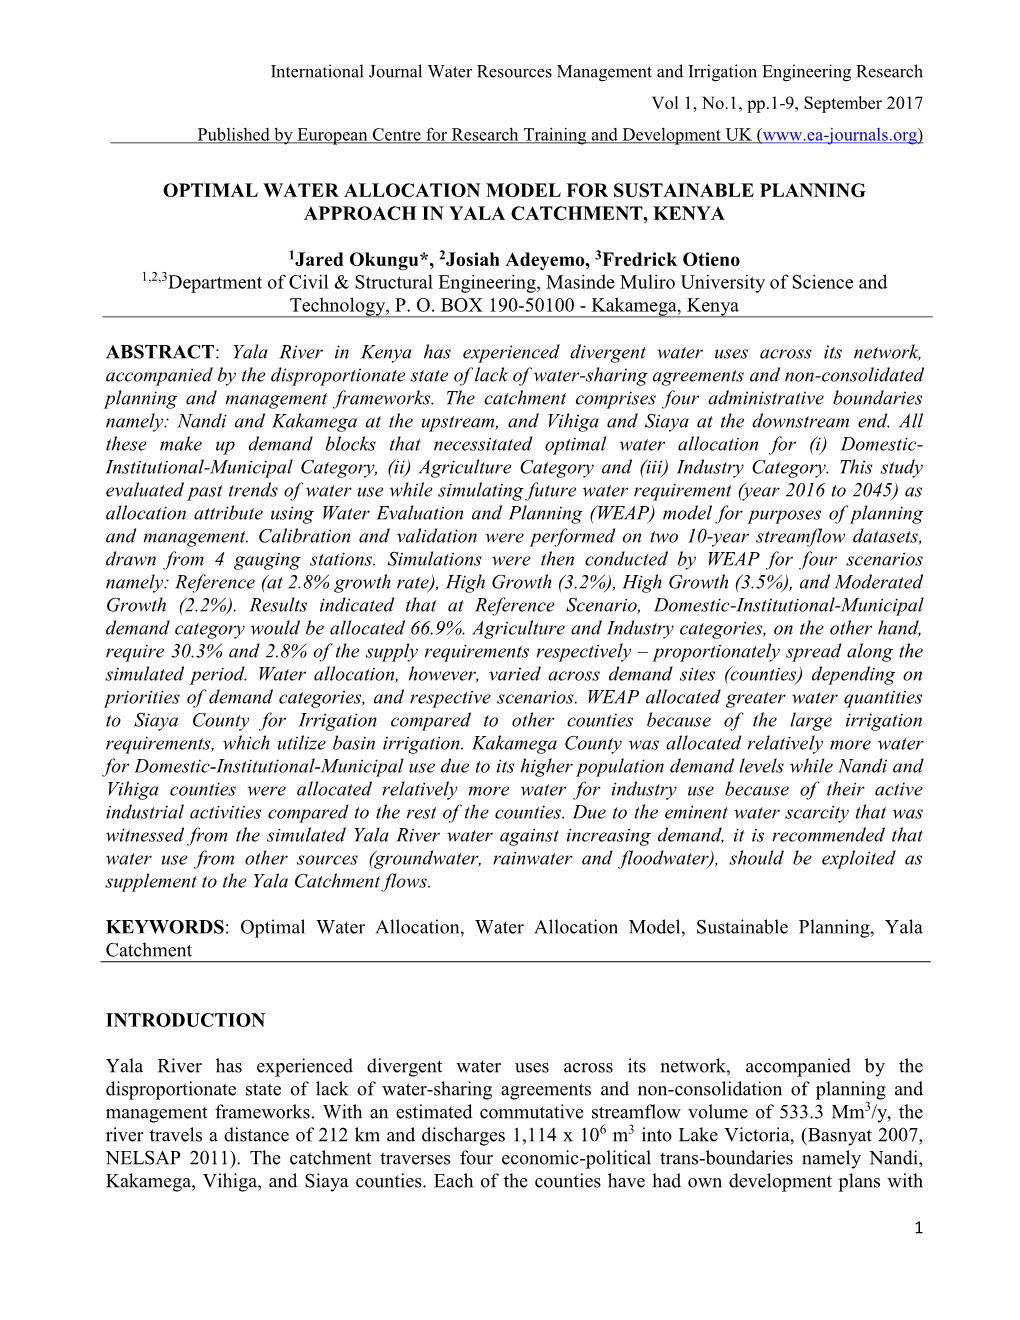 Optimal Water Allocation Model for Sustainable Planning Approach in Yala Catchment, Kenya